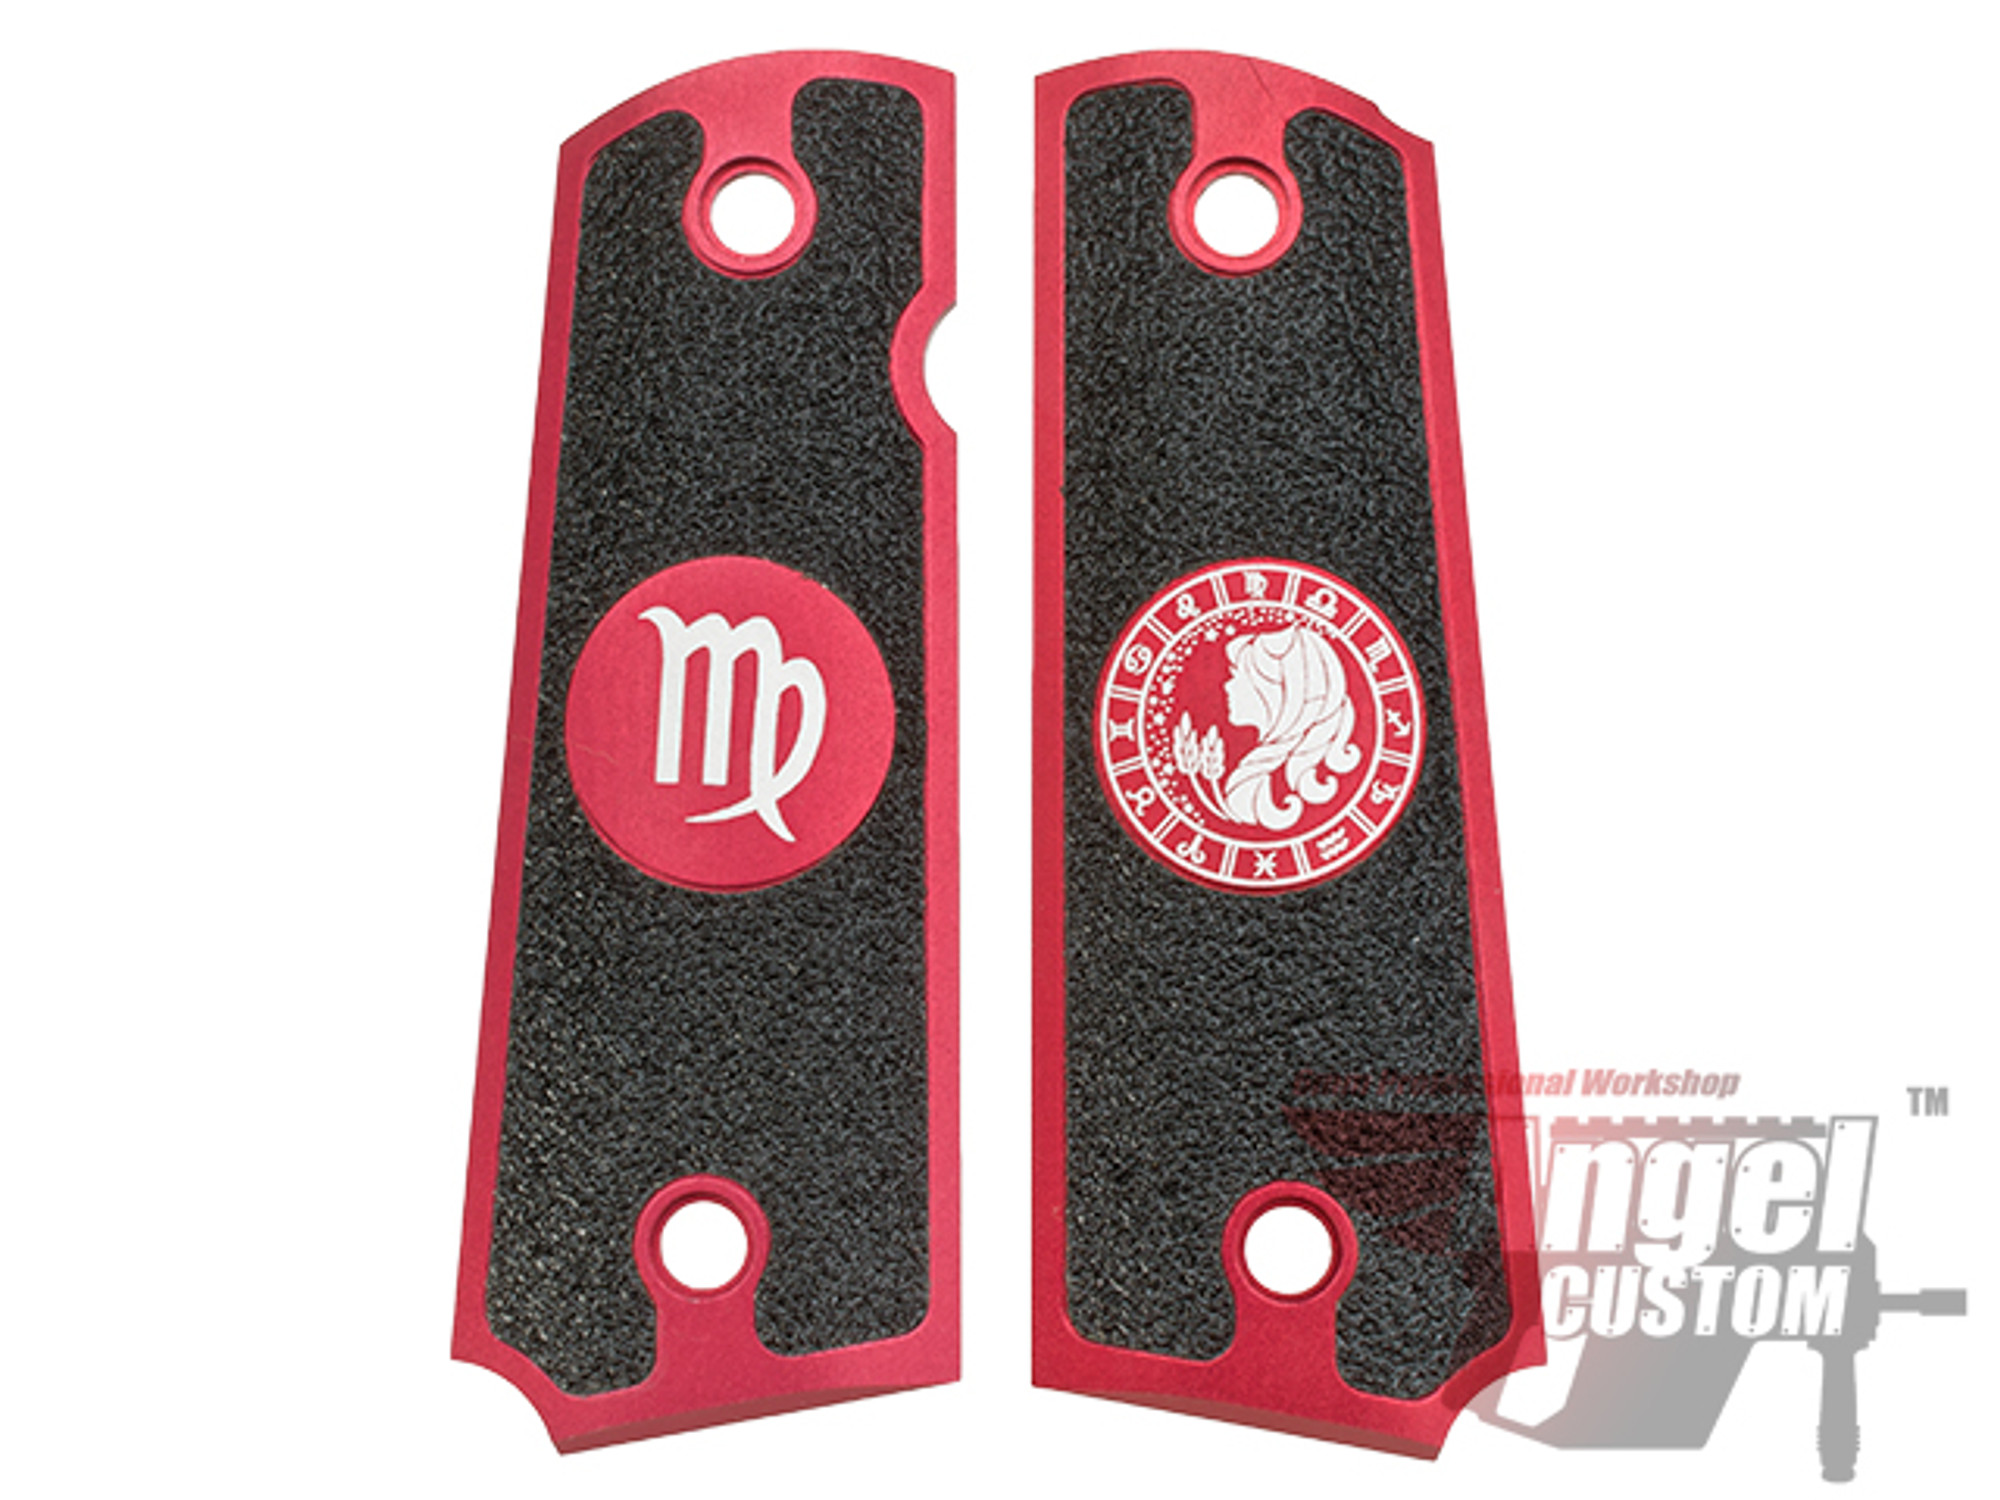 Angel Custom CNC Machined Tac-Glove "Zodiac" Grips for WE-Tech 1911 Series Airsoft Pistols - Red (Sign: Virgo)